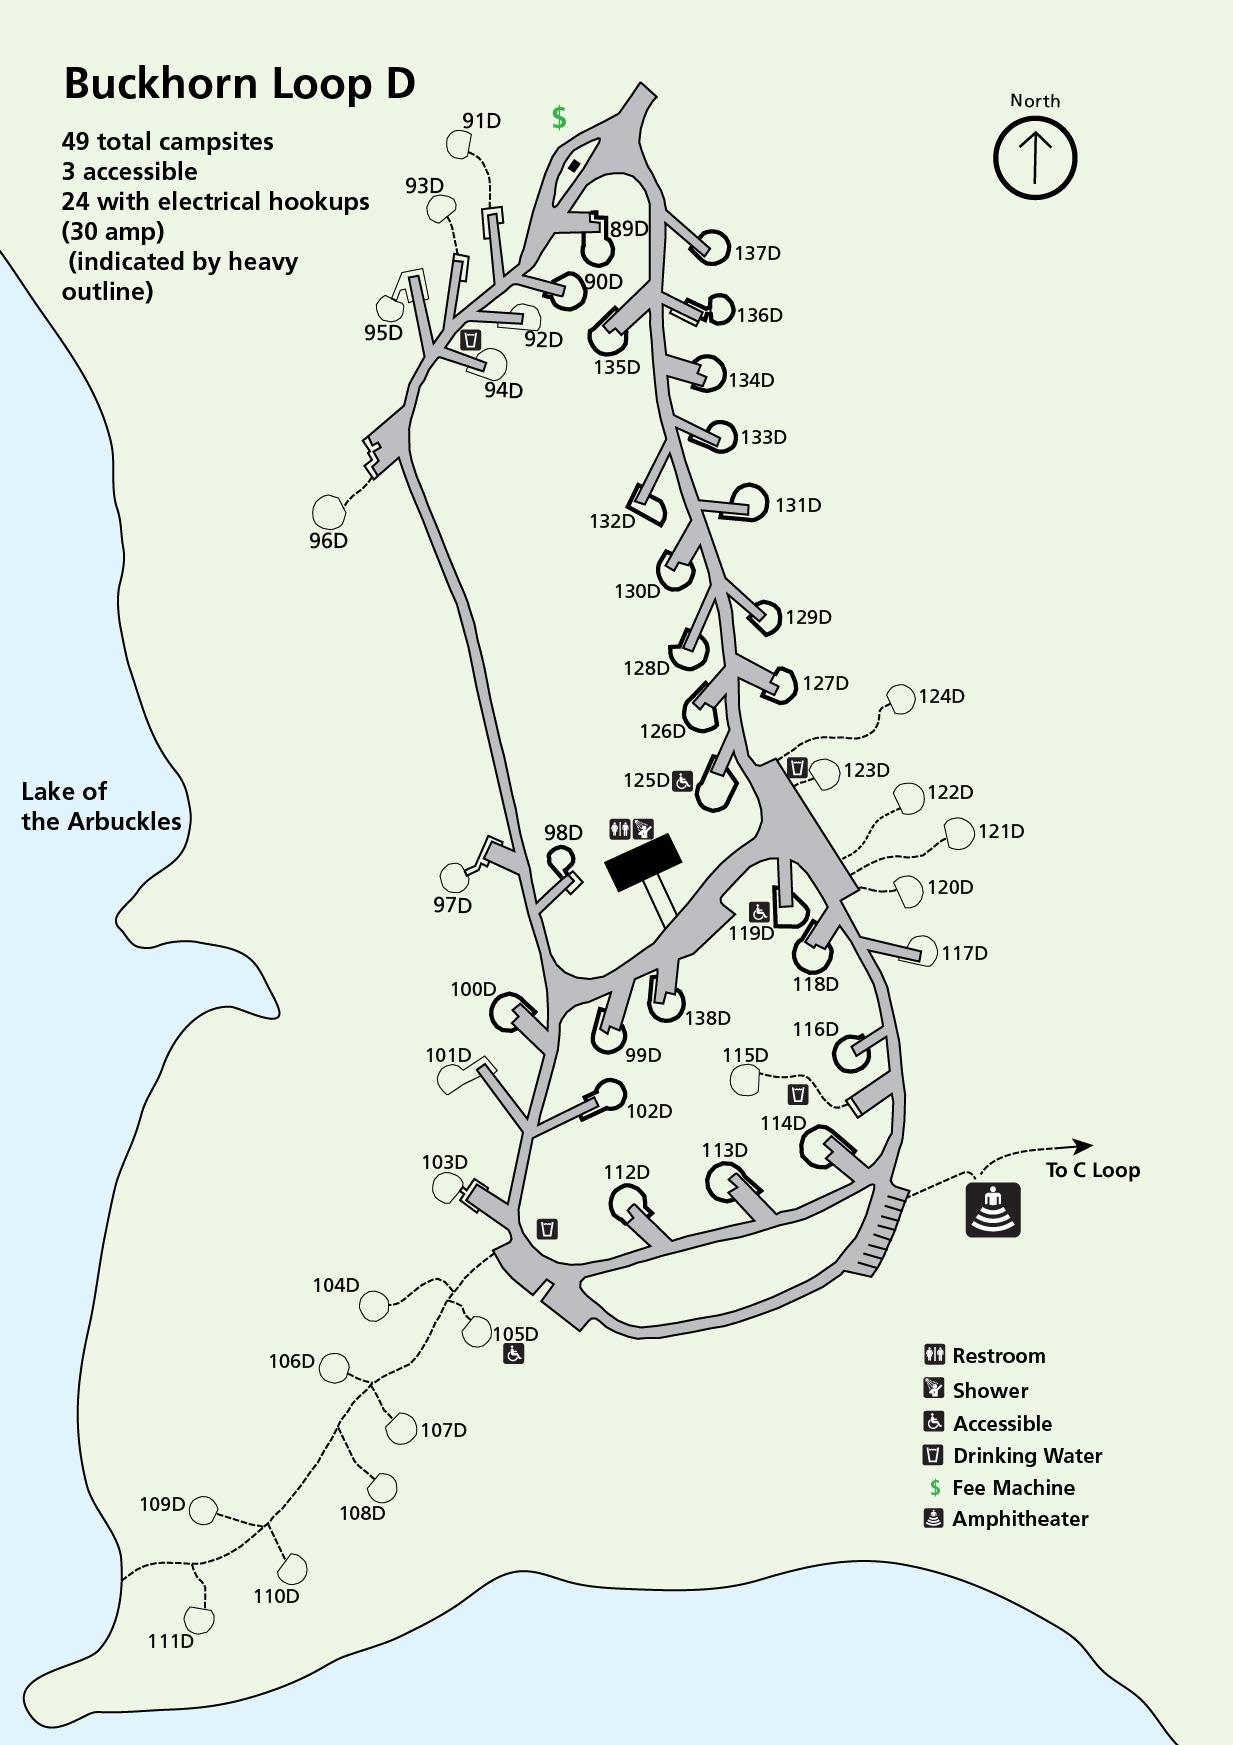 A map of Buckhorn Loop D depicting the relative locations of the restrooms, campsites, and lakeshore